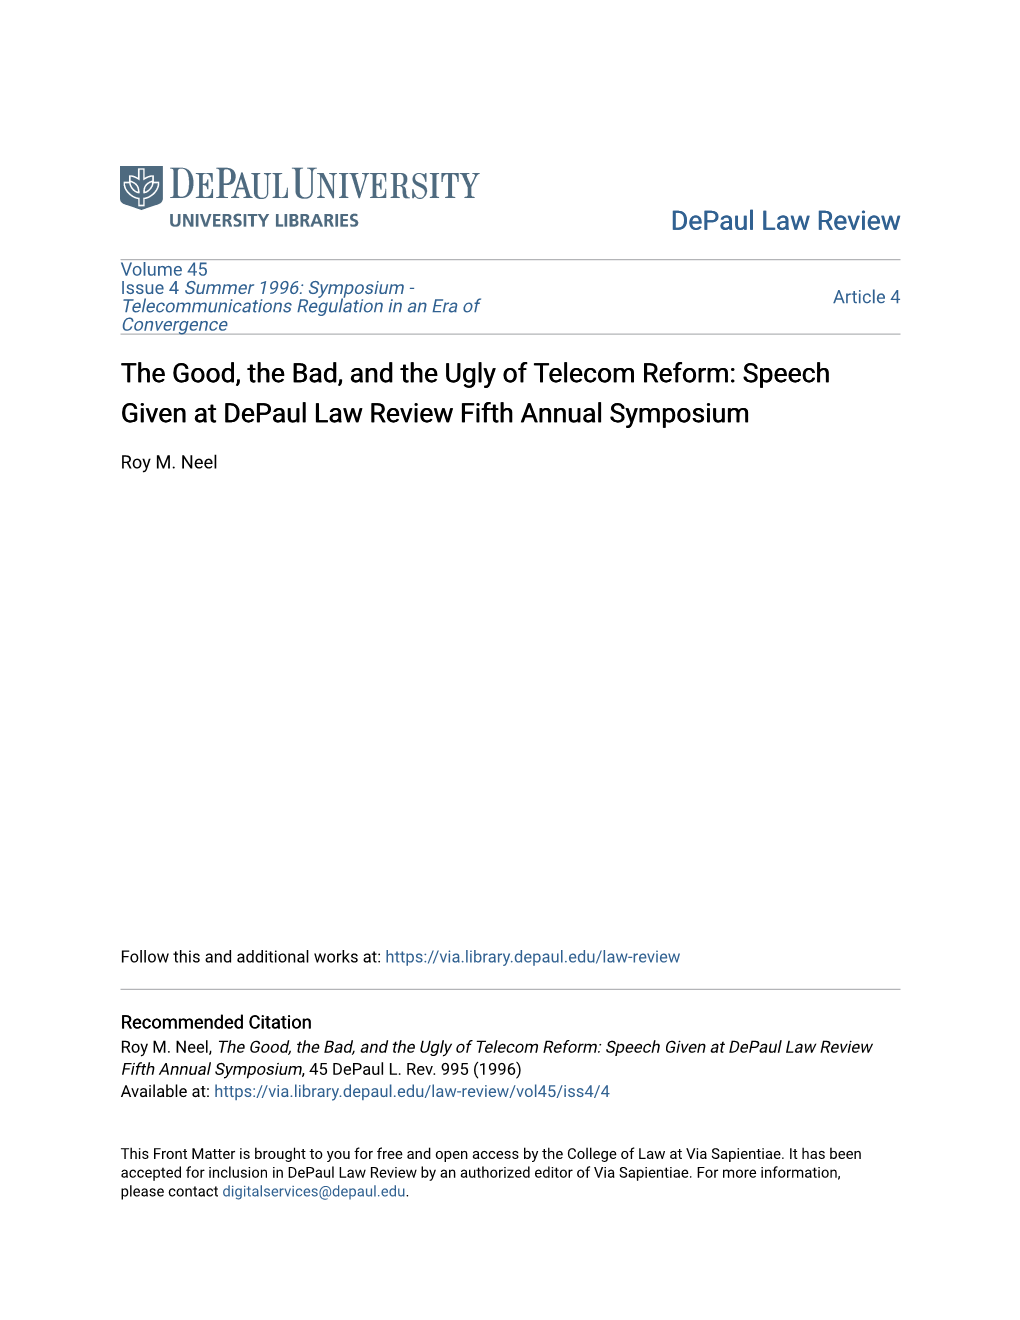 The Good, the Bad, and the Ugly of Telecom Reform: Speech Given at Depaul Law Review Fifth Annual Symposium